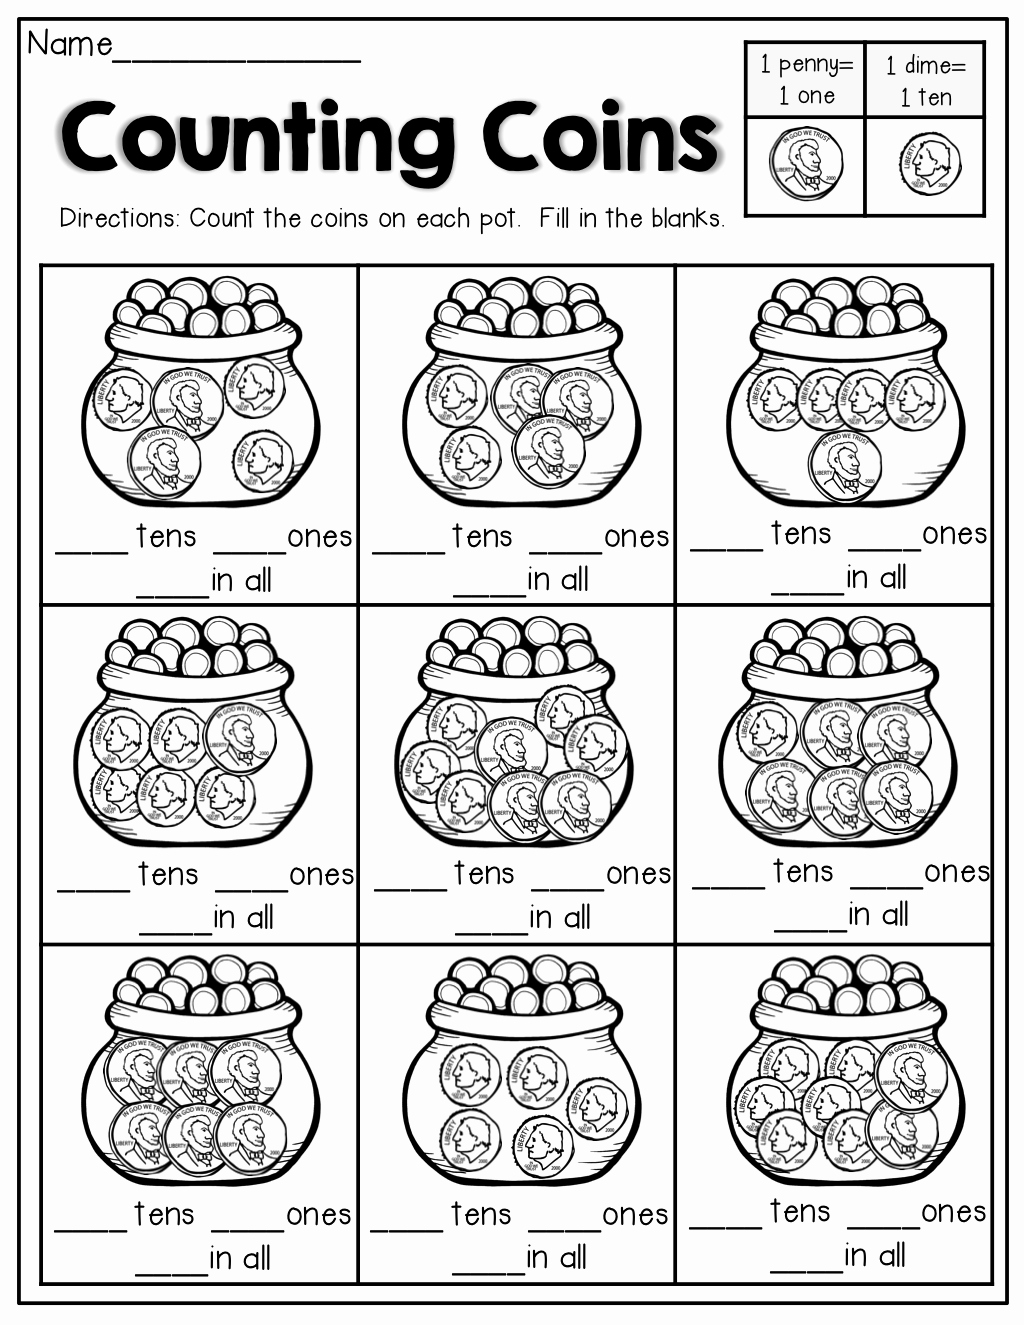 Values Of Coins Worksheet Best Of Counting Coins with Place Value